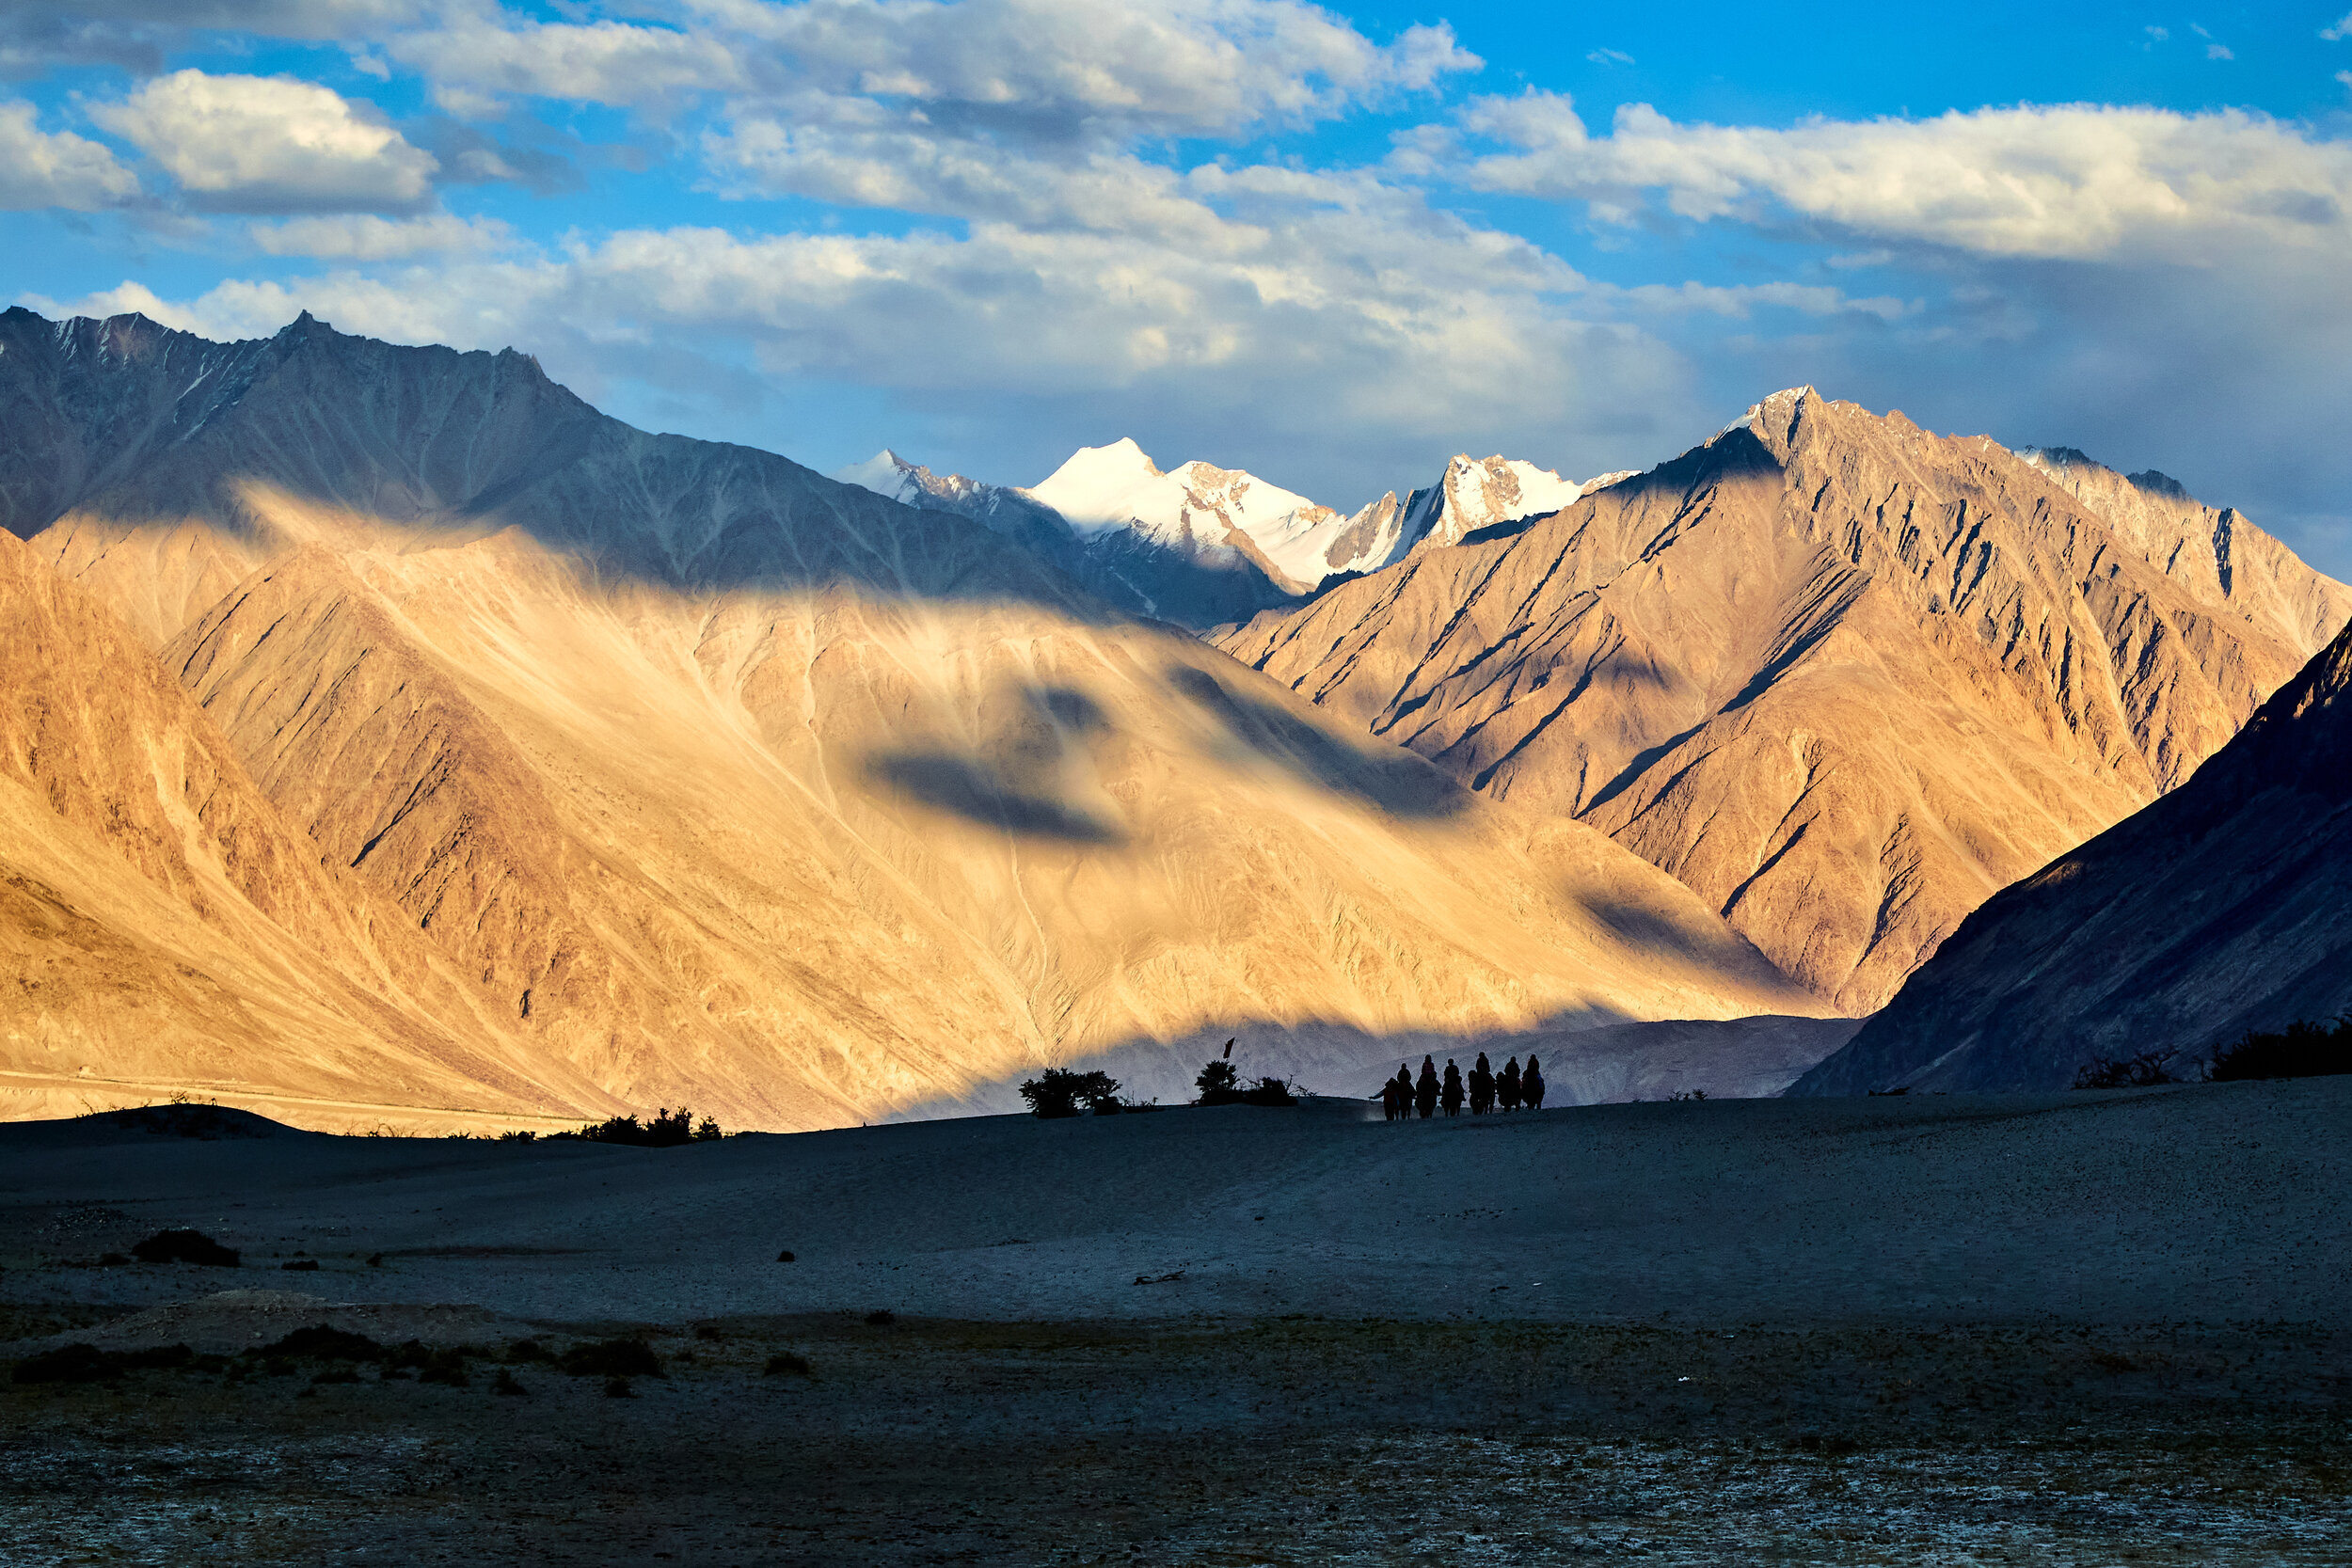  Nubra valley is formed by the surrounding Karakoram mountain ranges. This region was once a part of the ancient silk route. 